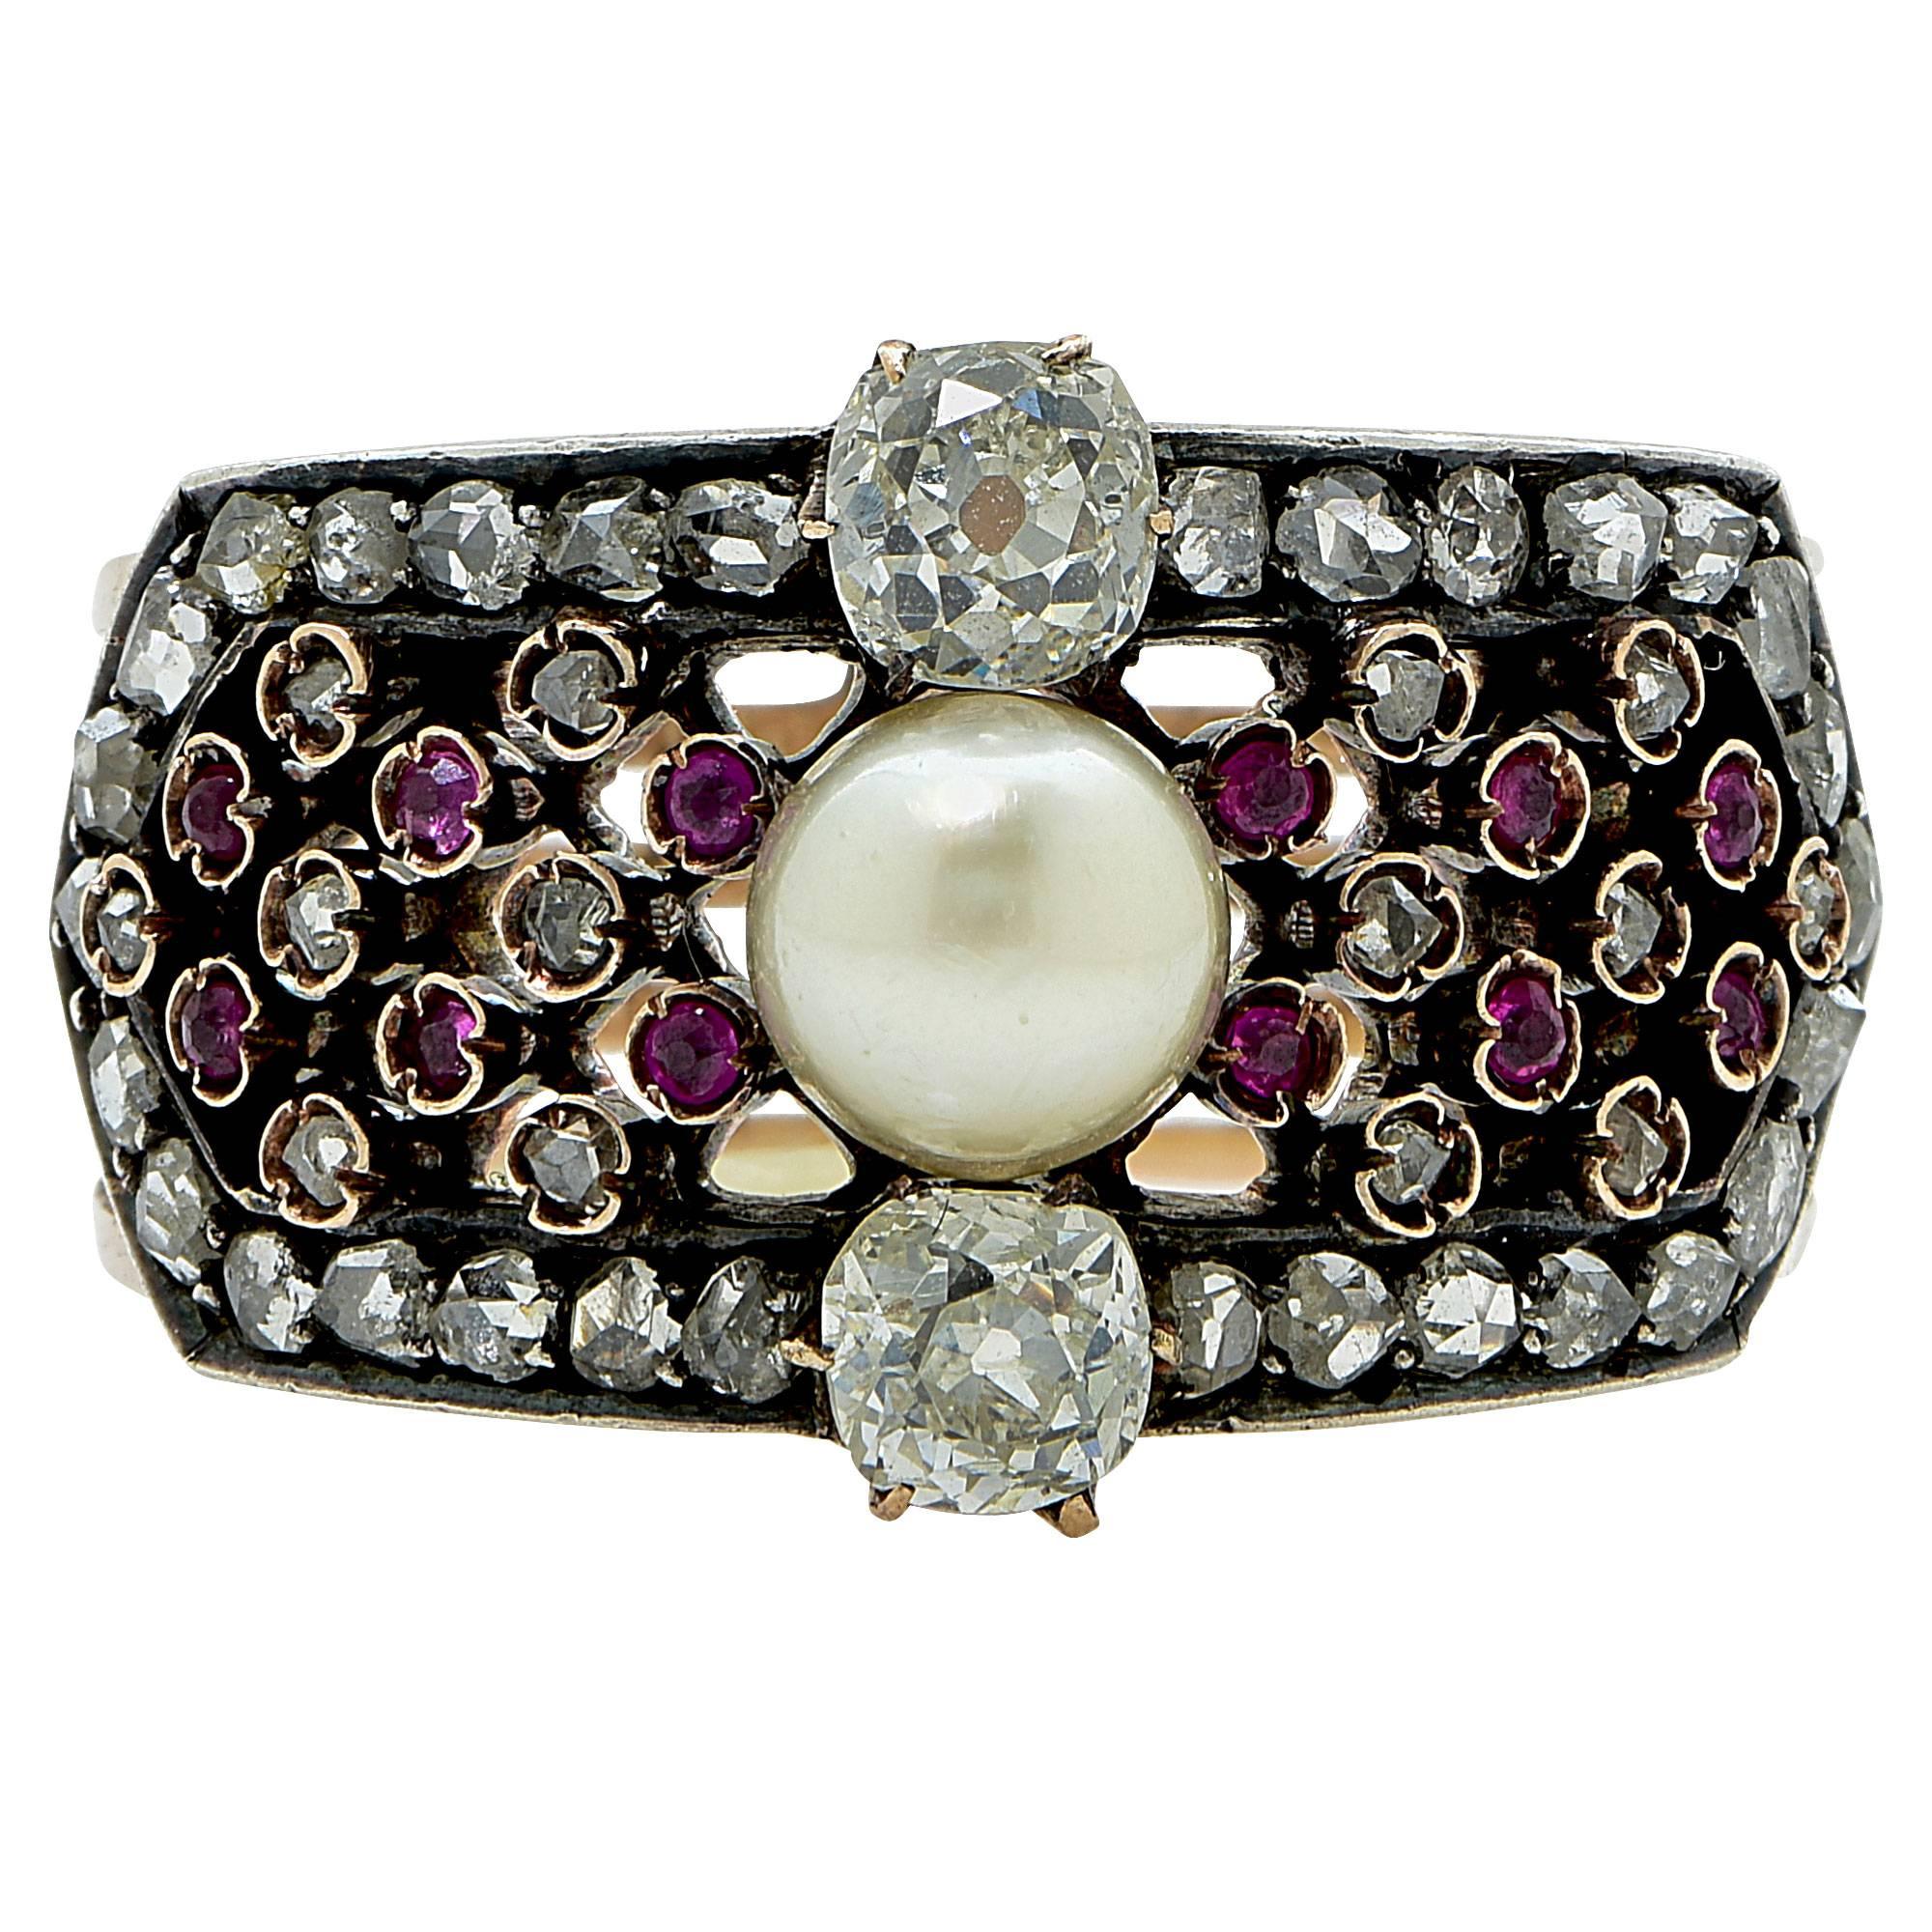 Silver over gold Victorian ring featuring a 6mm natural pearl flanked by 2 miner cut diamonds weighing approximately .70cts total, G-H color VS-SI clarity. Accented by 44 rose cut and miner diamonds weighing approximately .60cts total and 12 rubies